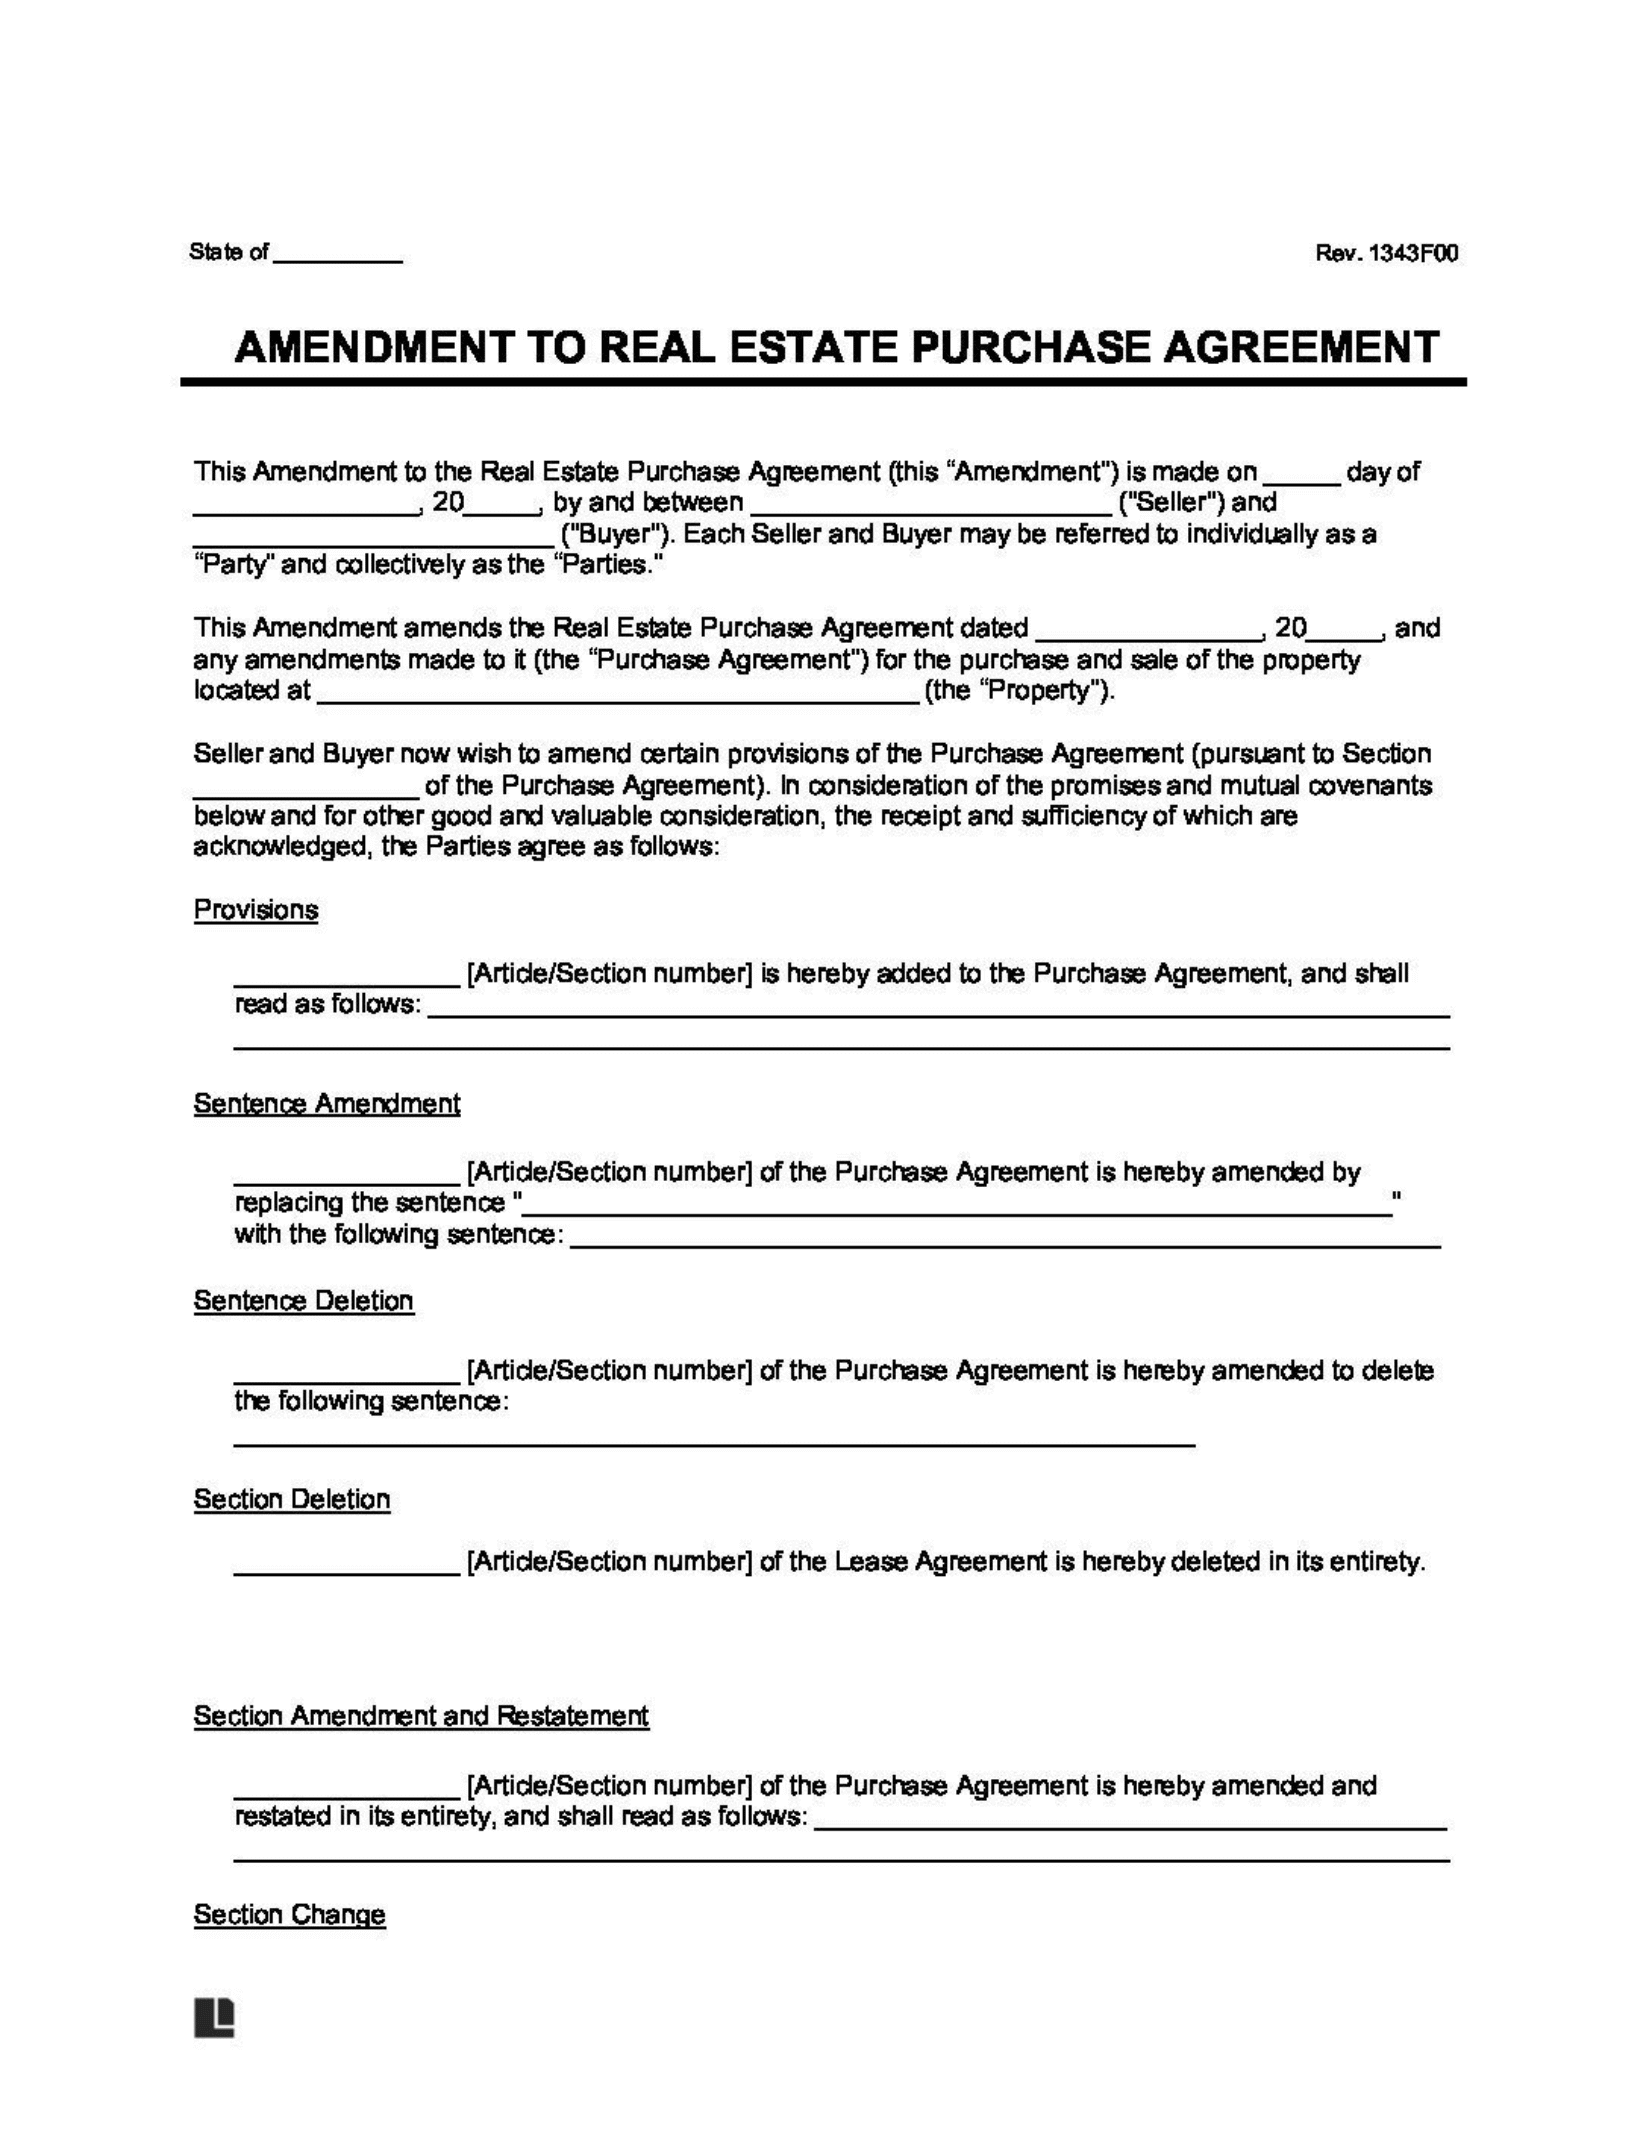 amendment-to-real-estate-purchase-agreement